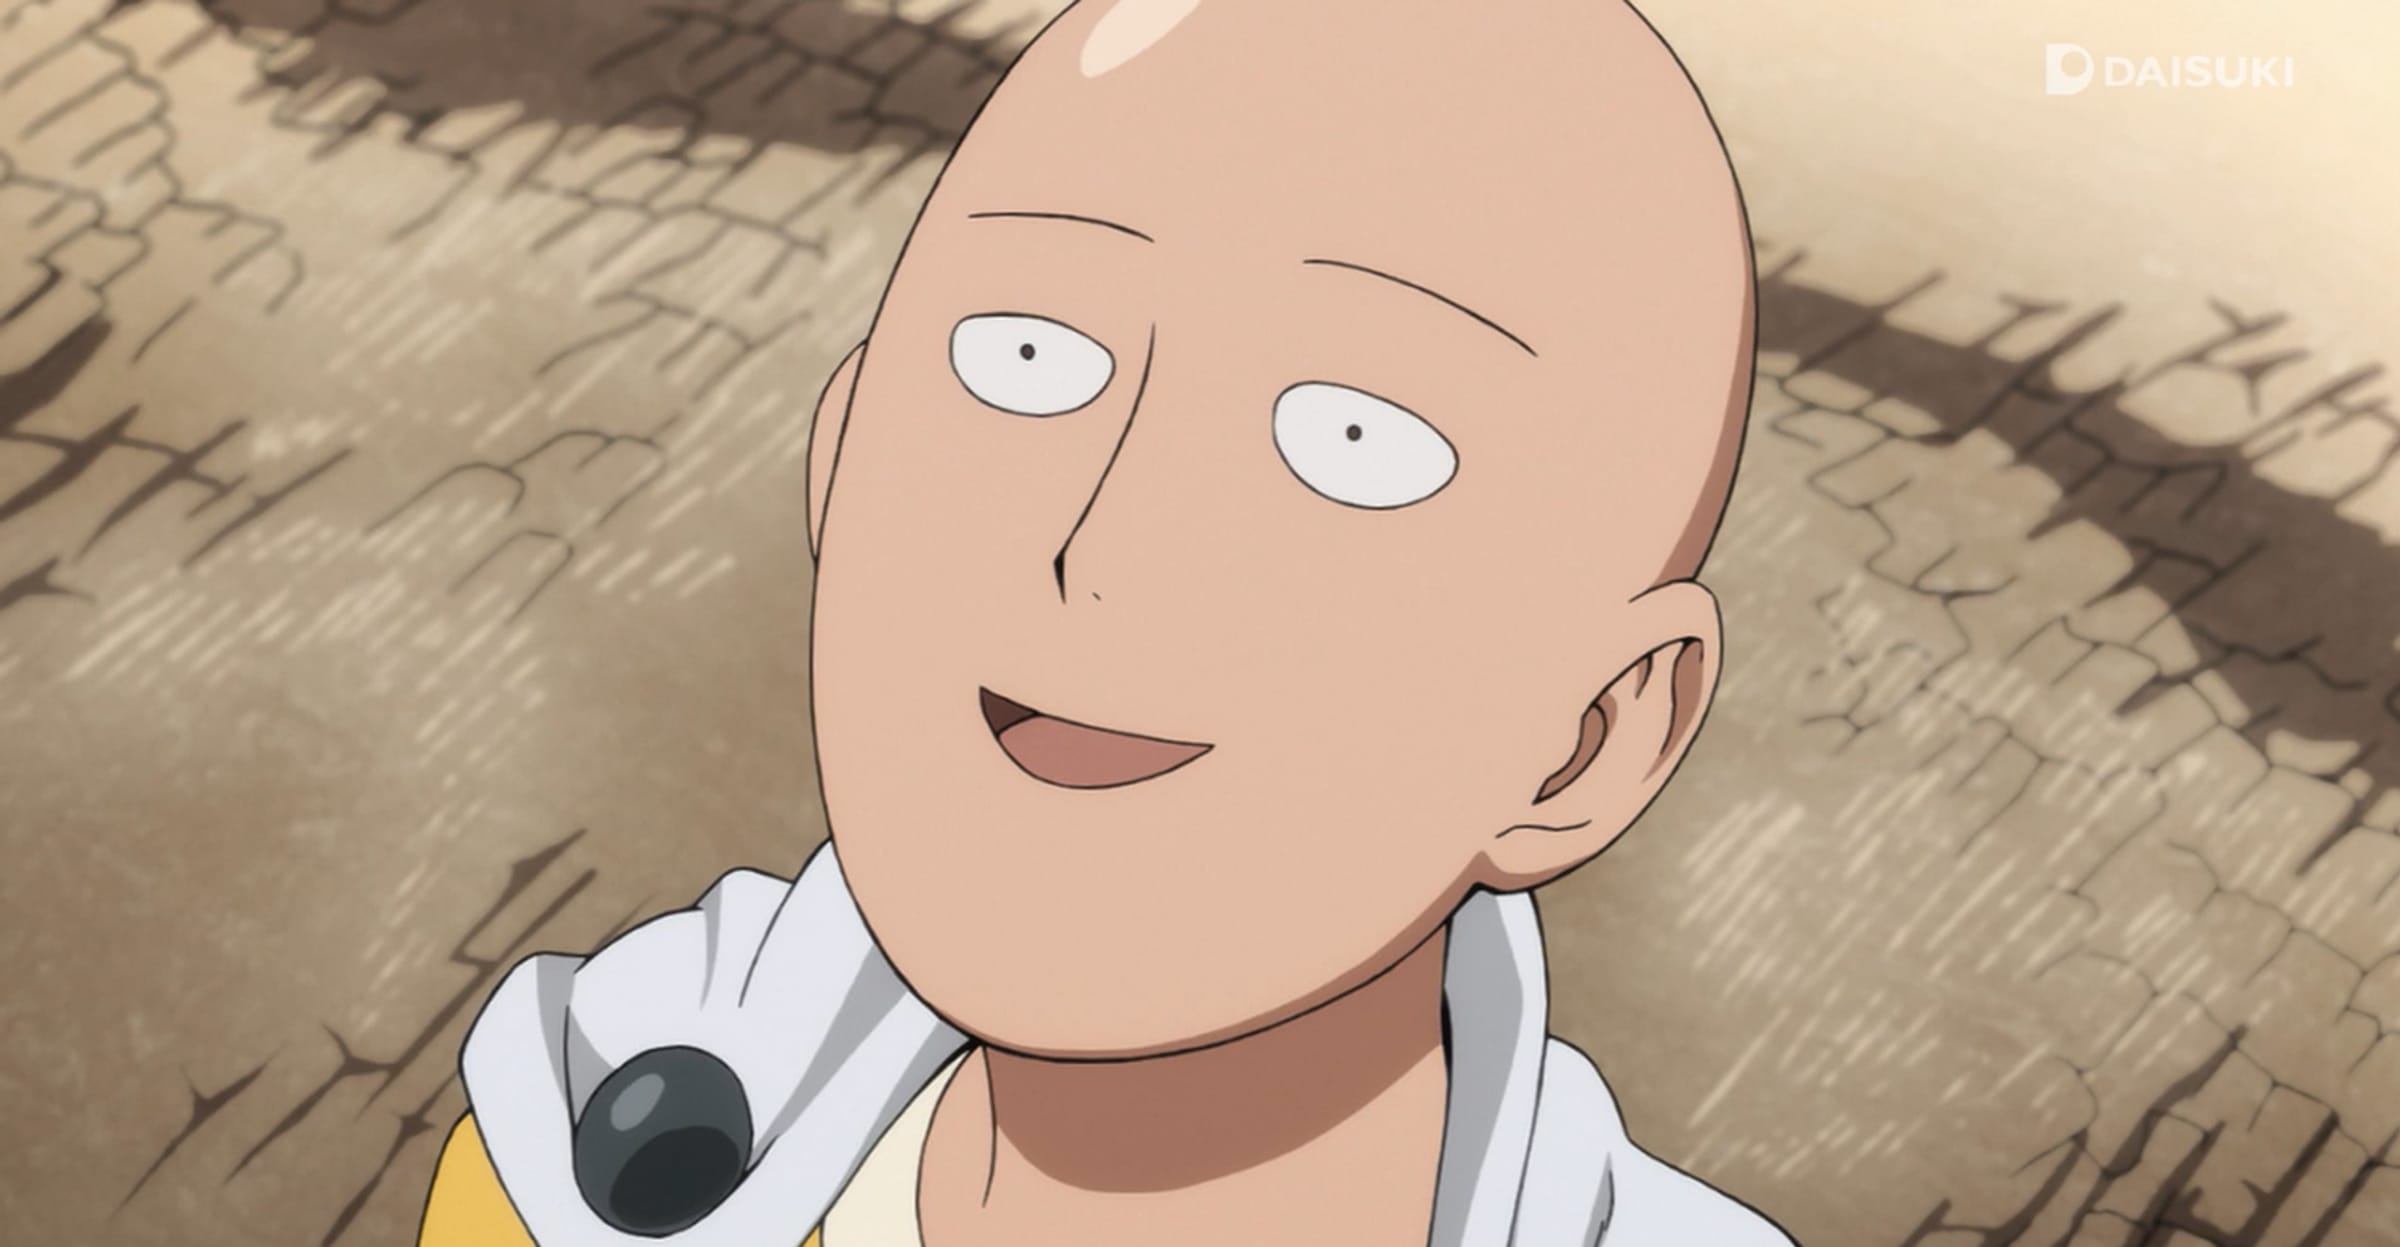 The List of My Favourite One Punch Man Characters. What do you